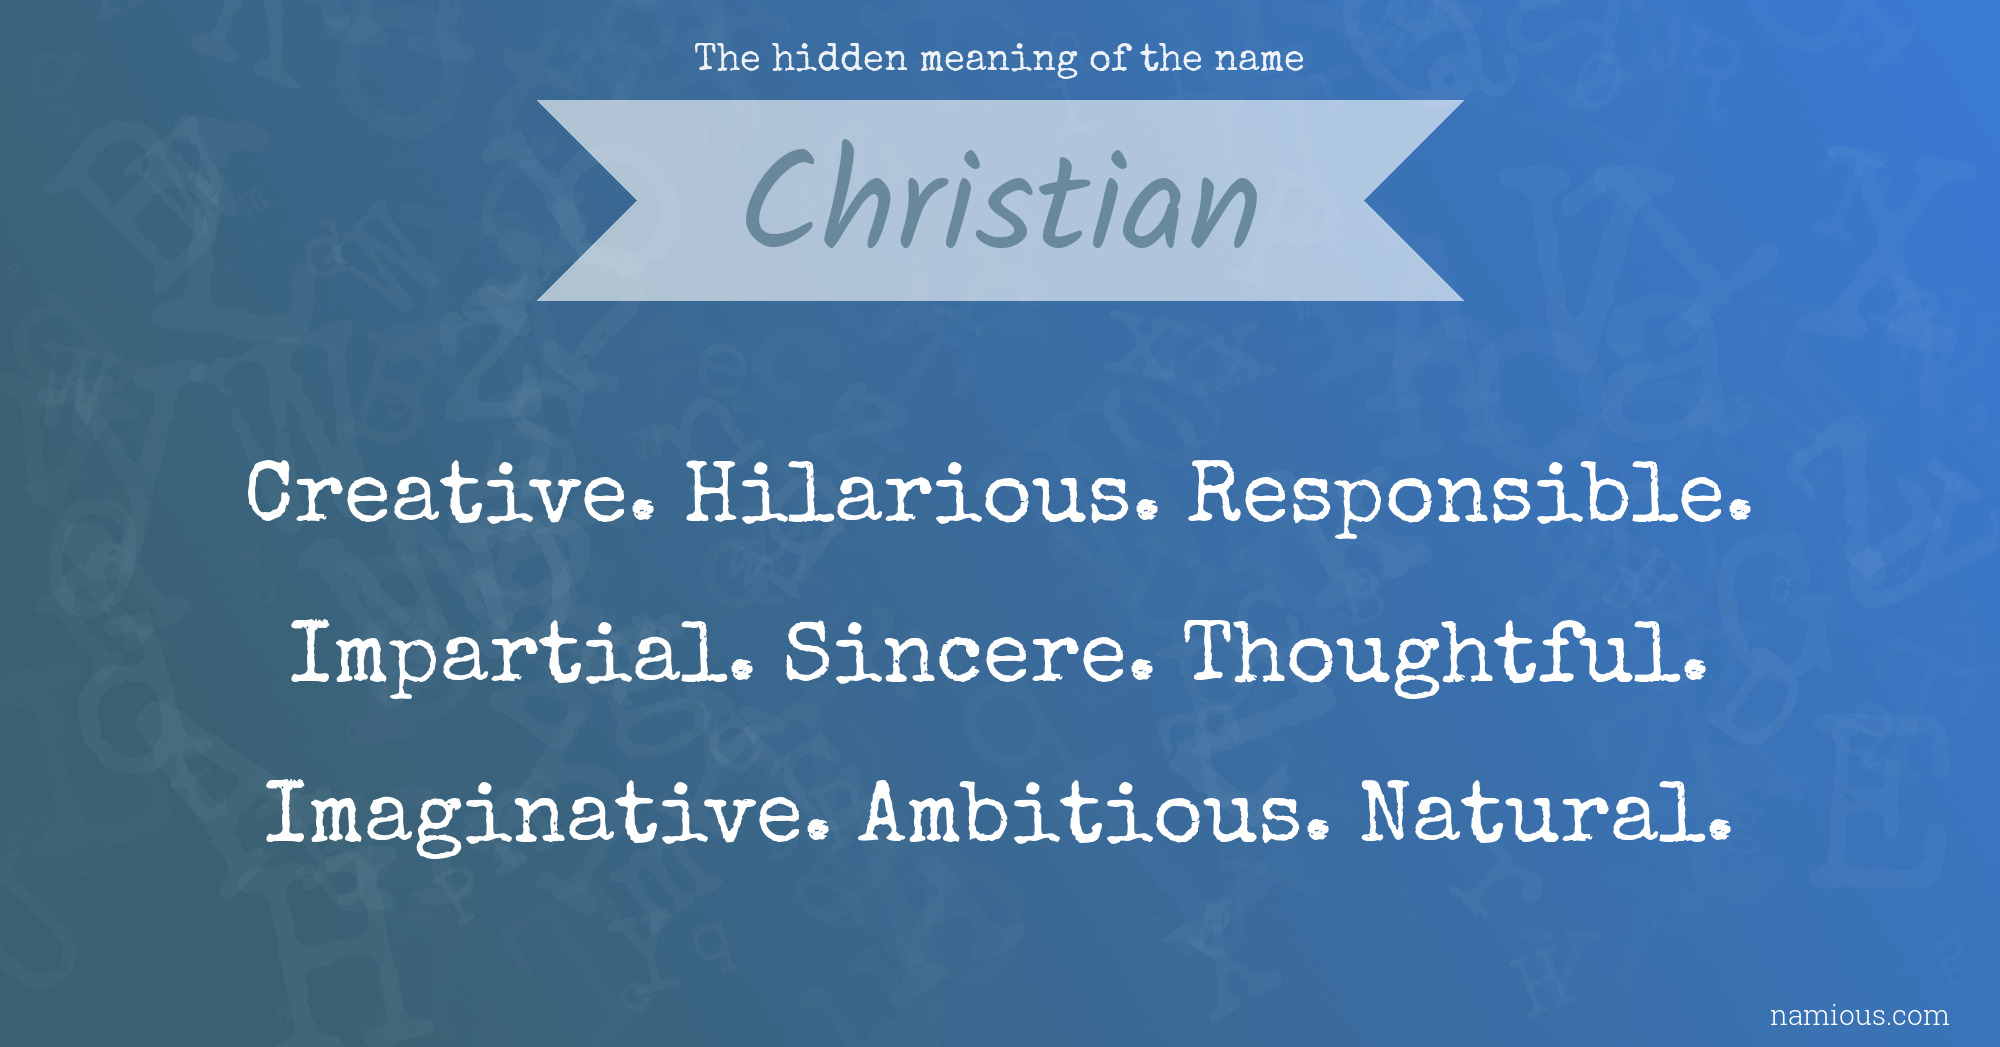 The hidden meaning of the name Christian